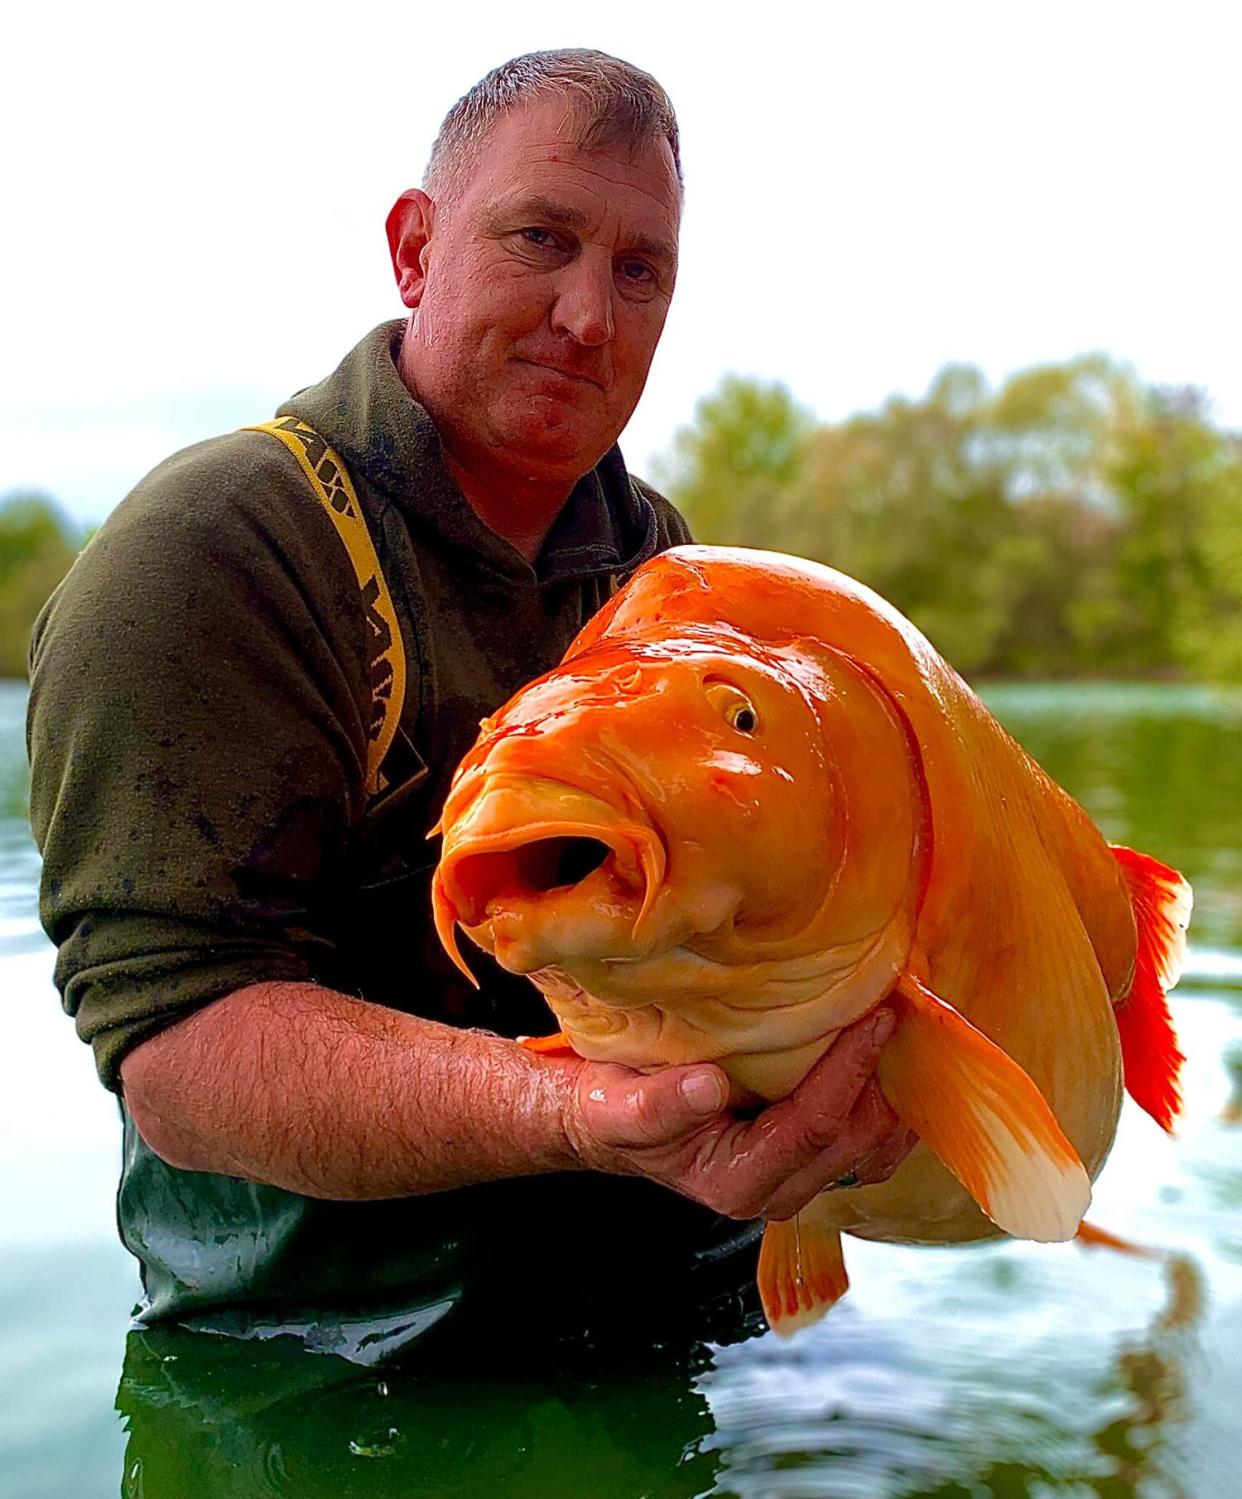 ??CARROT?? weighing in @67.4lbs!! Well done Andy top dangling